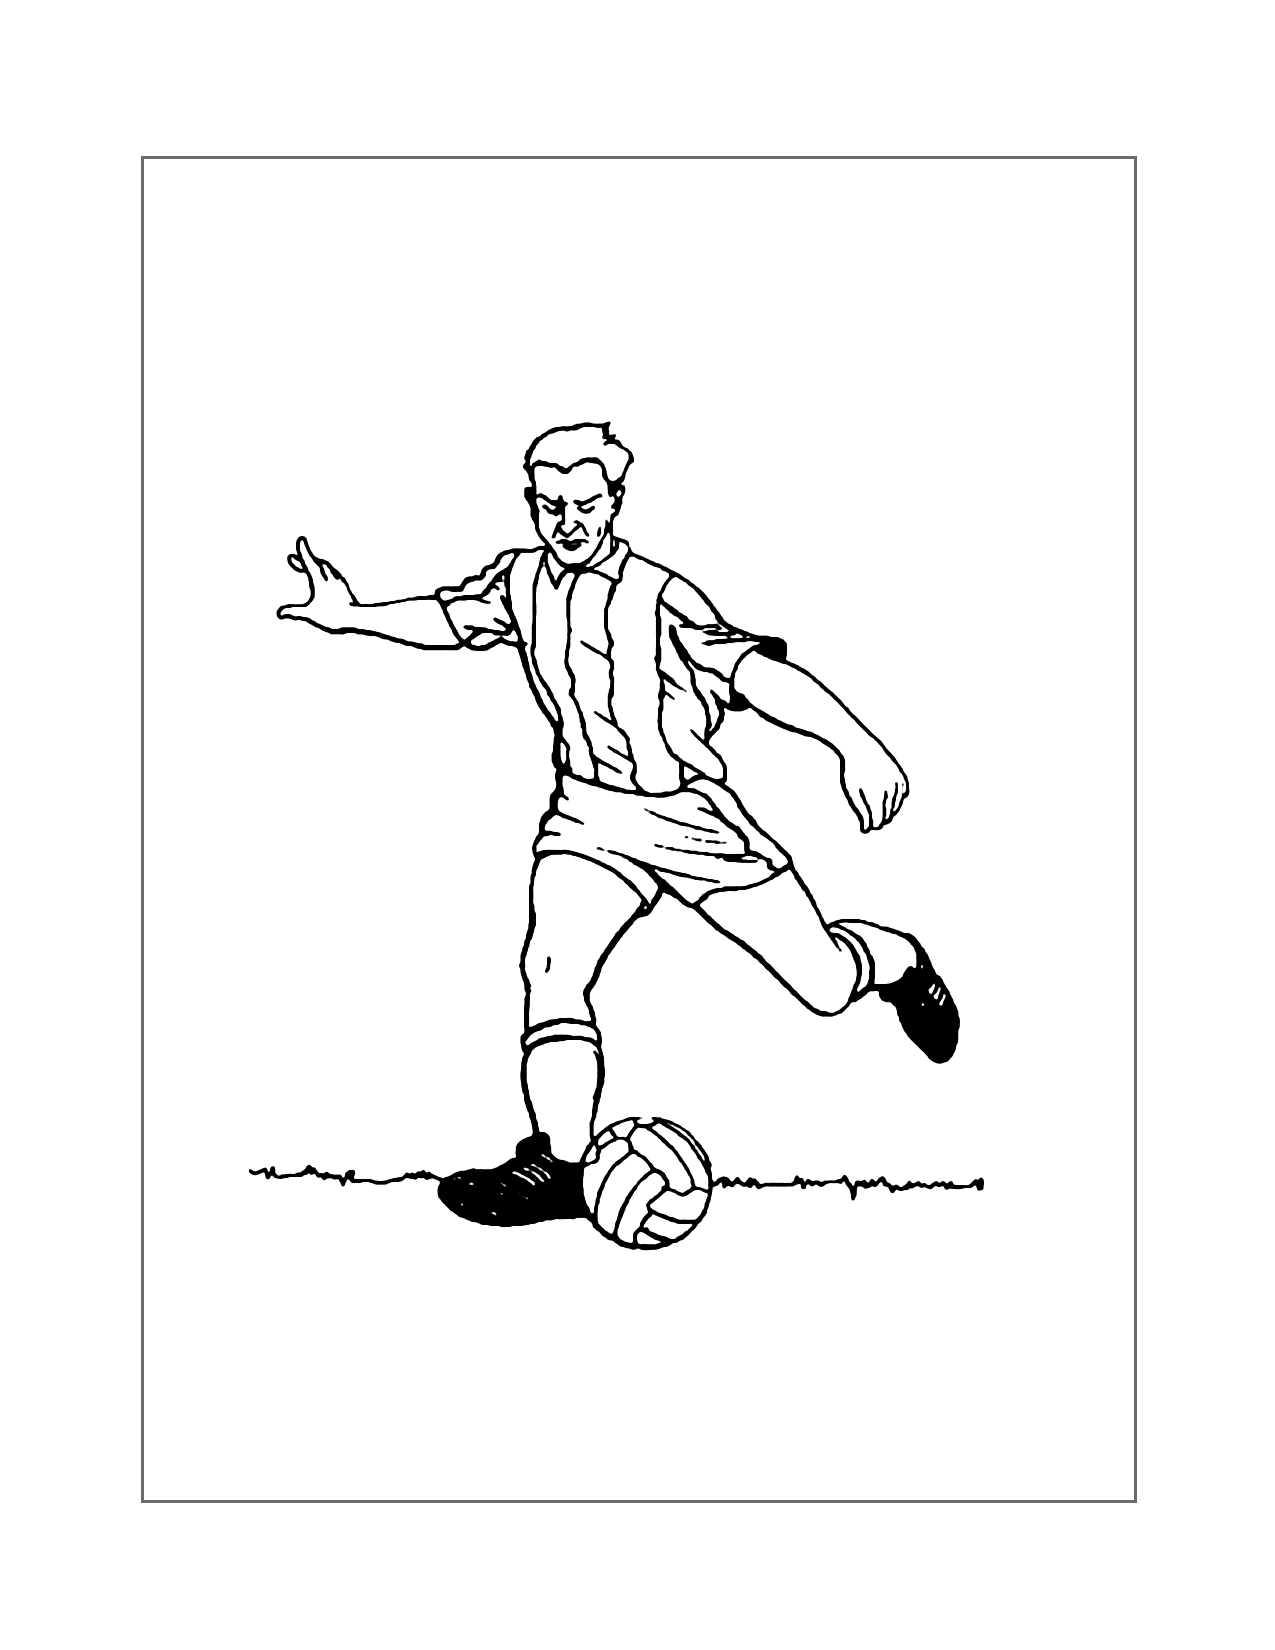 Man Playing Soccer Coloring Page